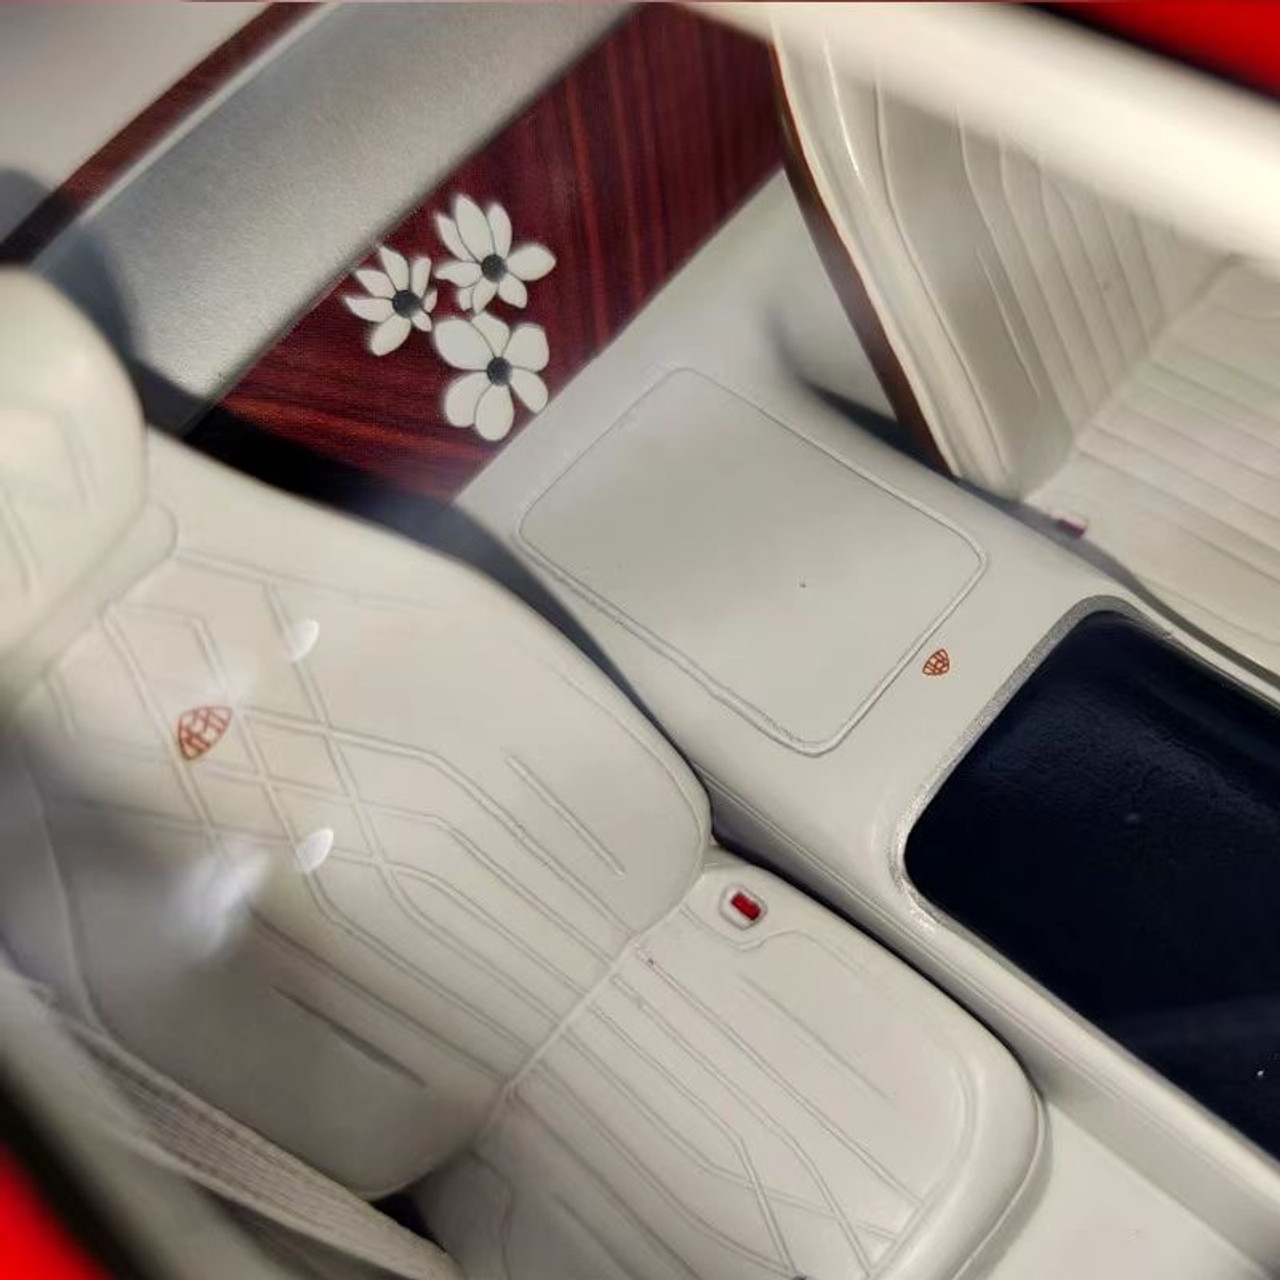 1/18 Schuco Vision Mercedes-Maybach Ultimate Luxury (Red) Car Model